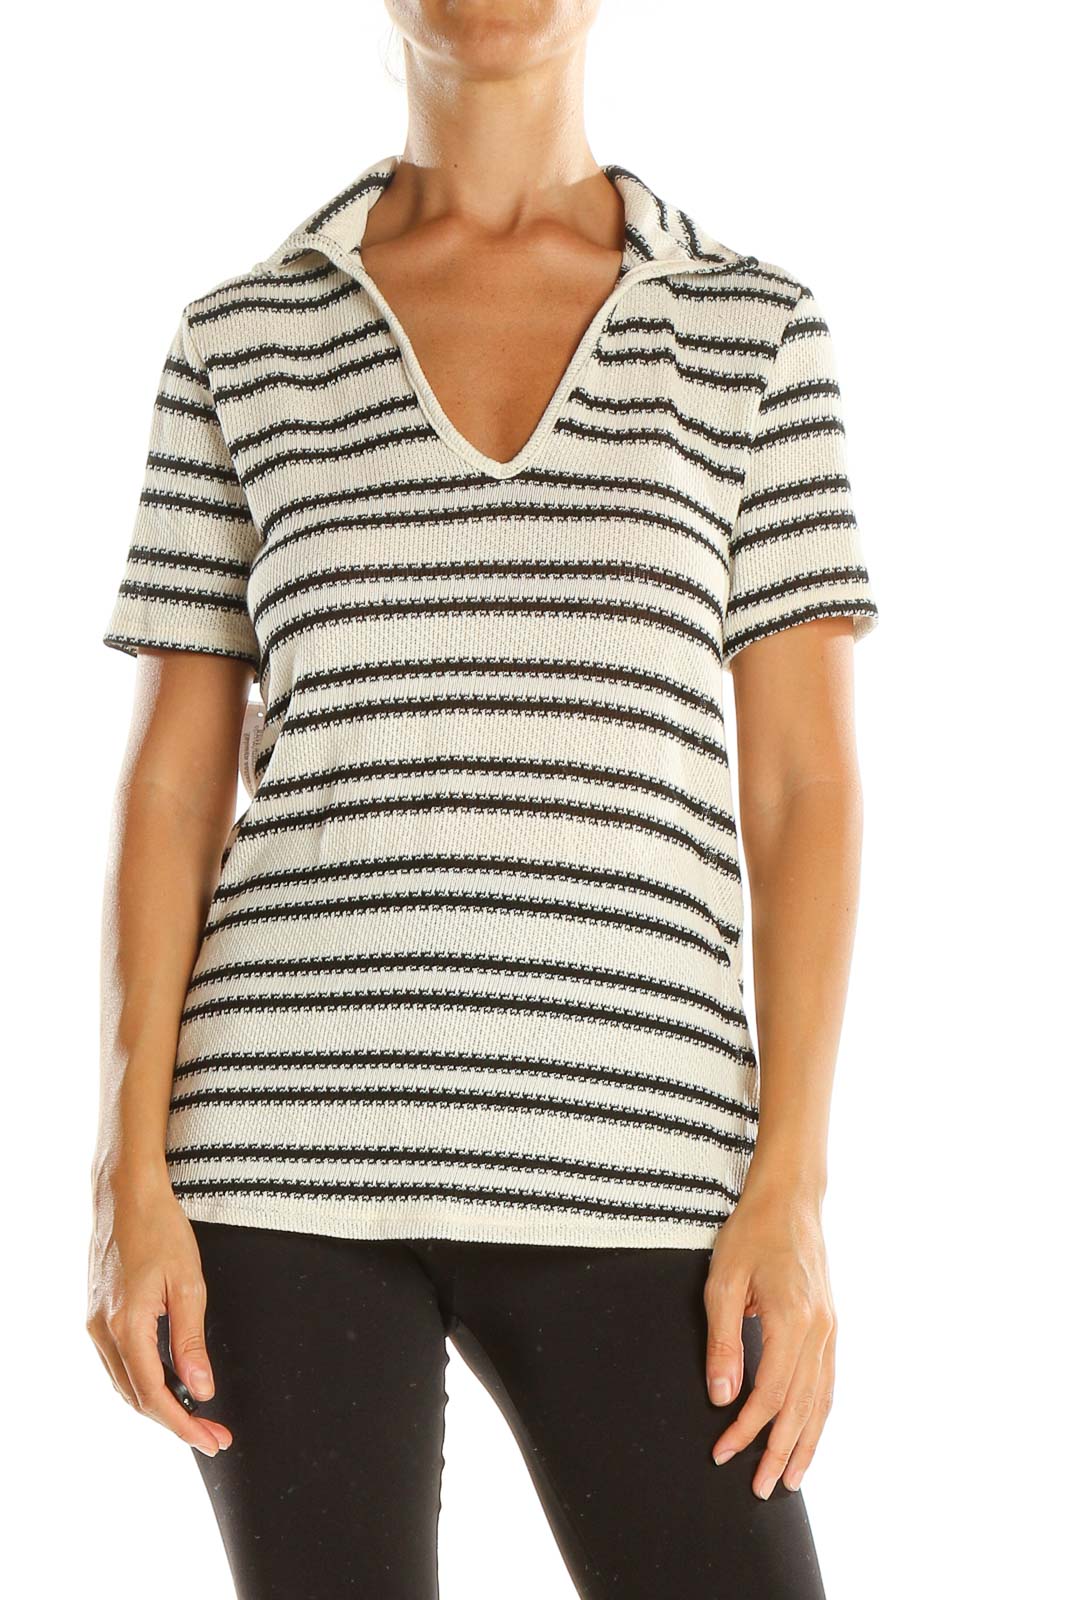 White Black Striped Casual Top Front